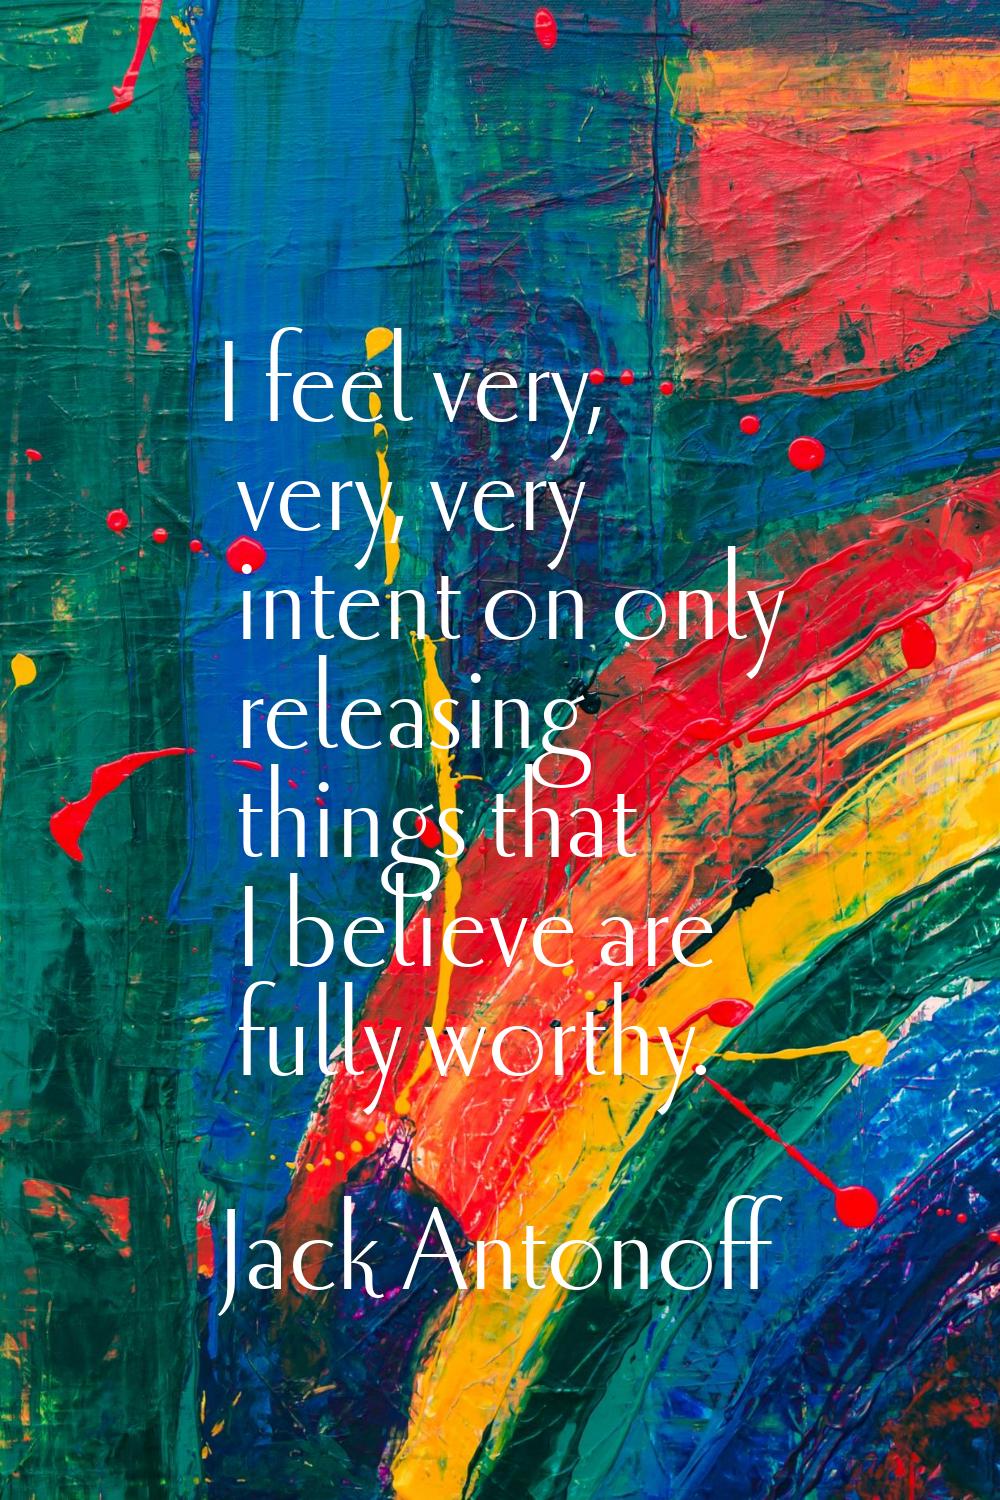 I feel very, very, very intent on only releasing things that I believe are fully worthy.